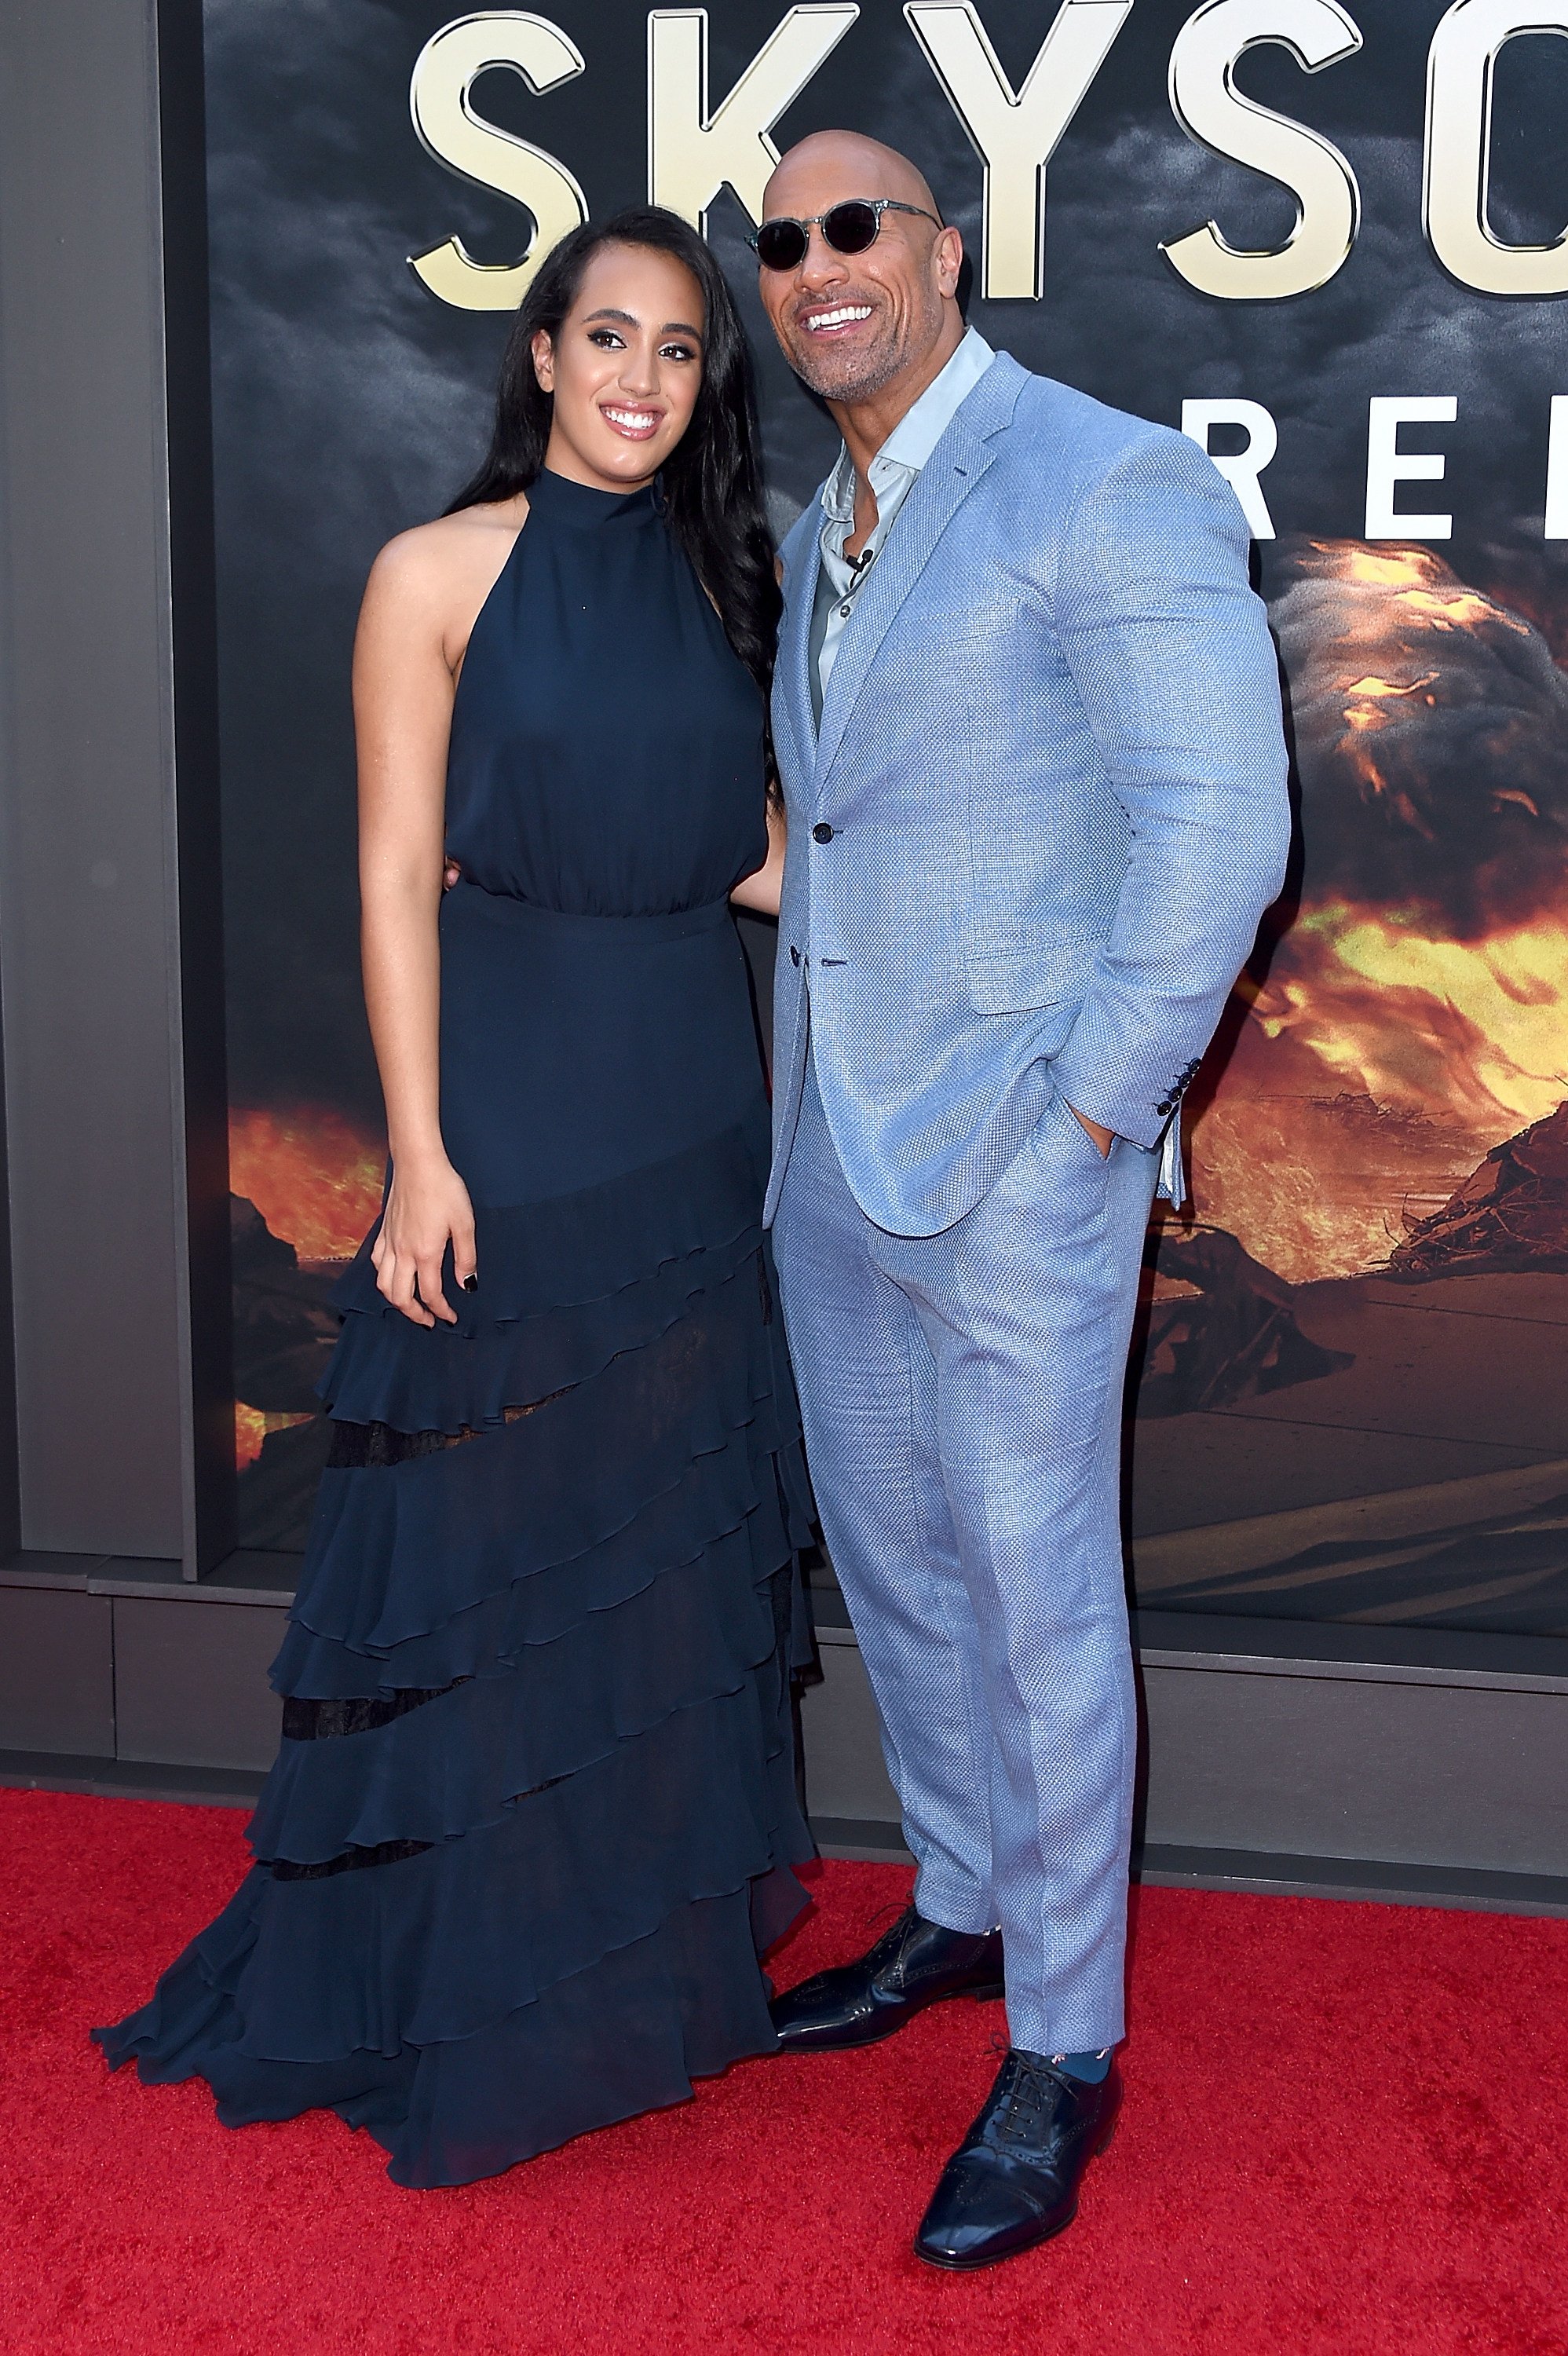 Dwayne “The Rock” Johnson has said he loves that his daughter Simone Johnson is following in his footsteps. Photo: Getty Images